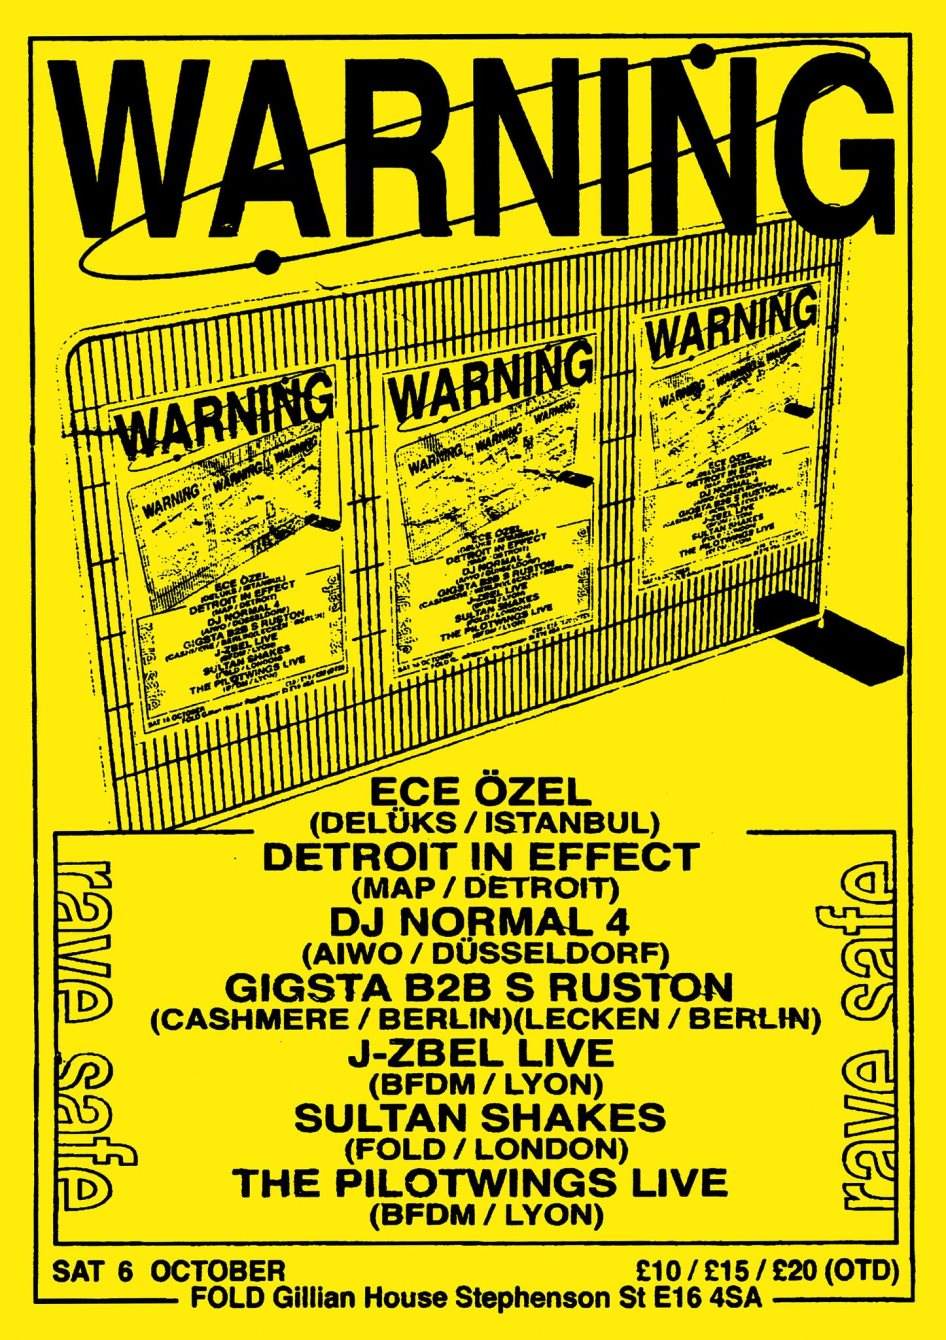 FOLD presents: Warning with D.I.E. / DJ Normal 4 / The Pilotwings (Live) / J-Zbel (Live) - Flyer front